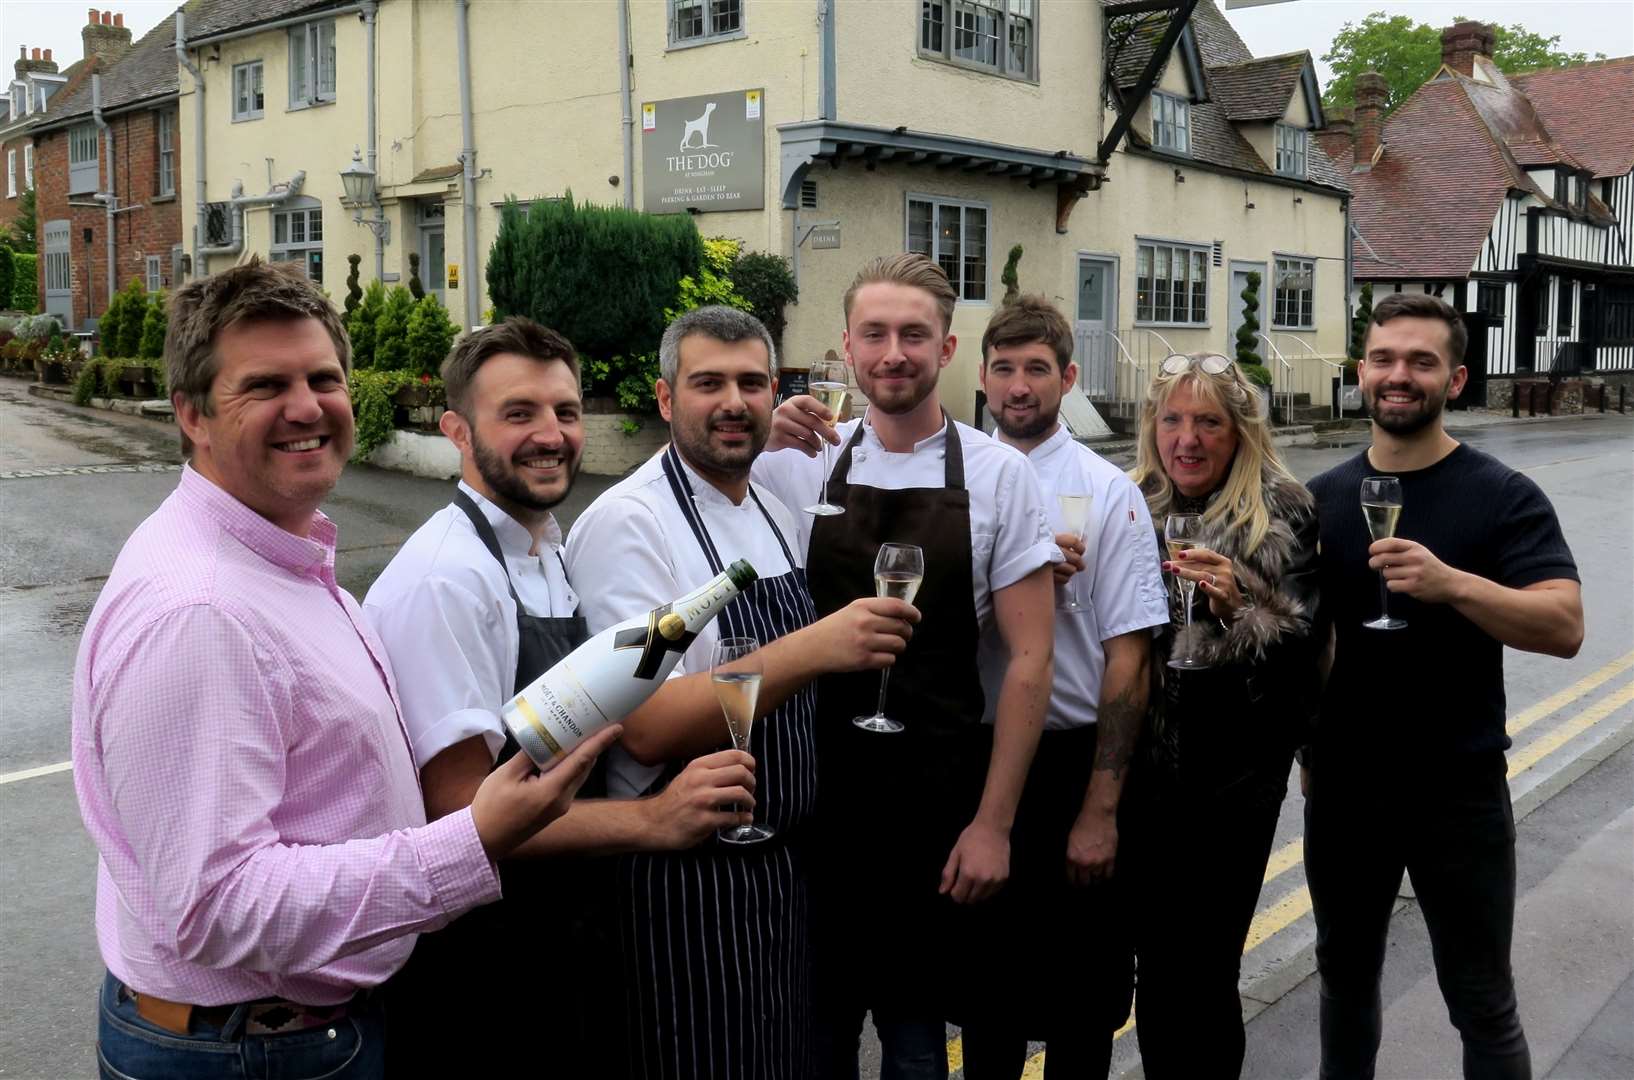 The award-winning team at The Dog with head chef Sam McClurkin (centre) and owners Marc Brigden and mum Marilyn Brigden